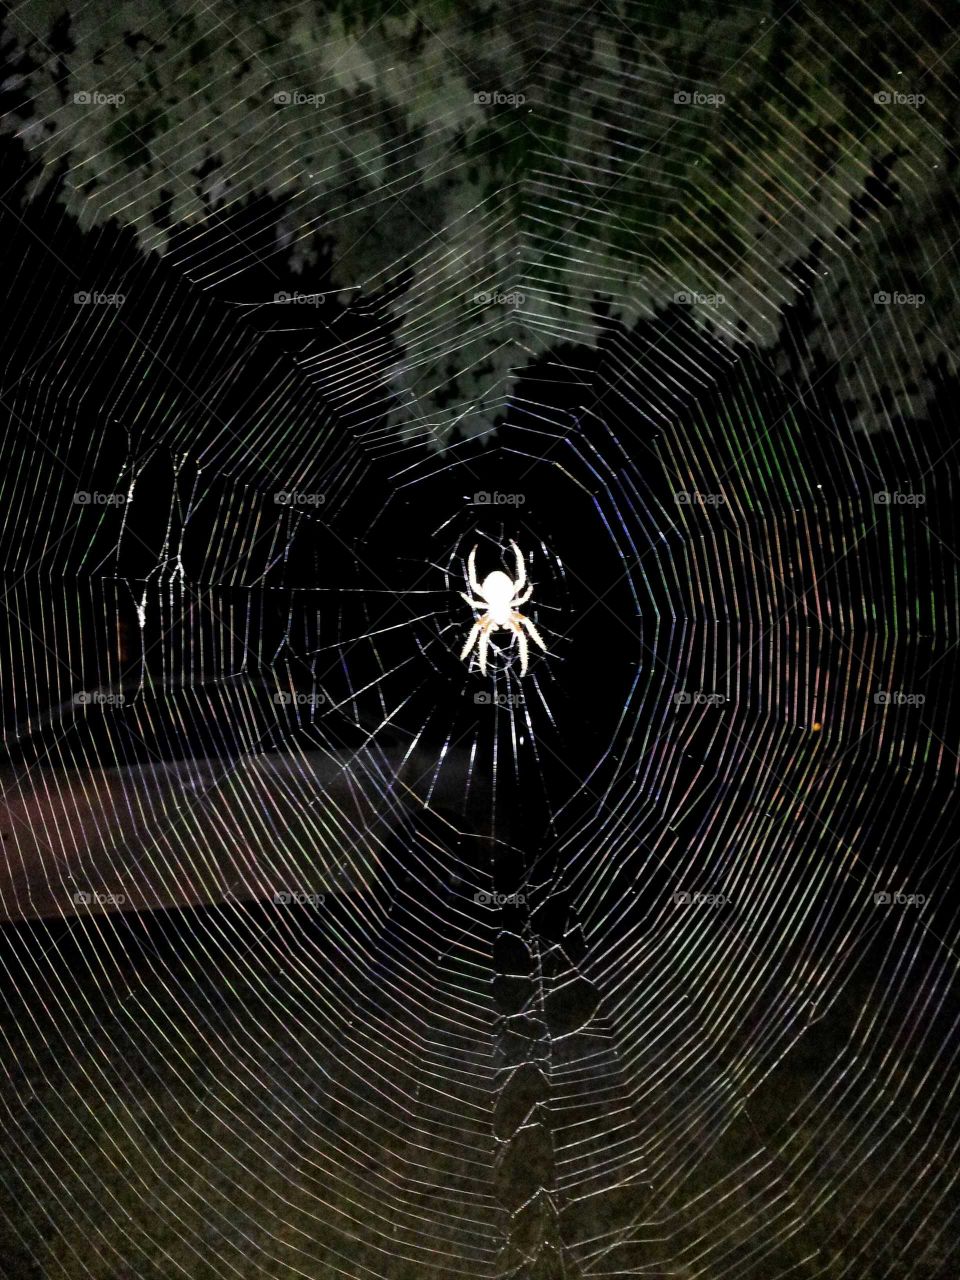 A large garden spider monitoring its web in my front yard.